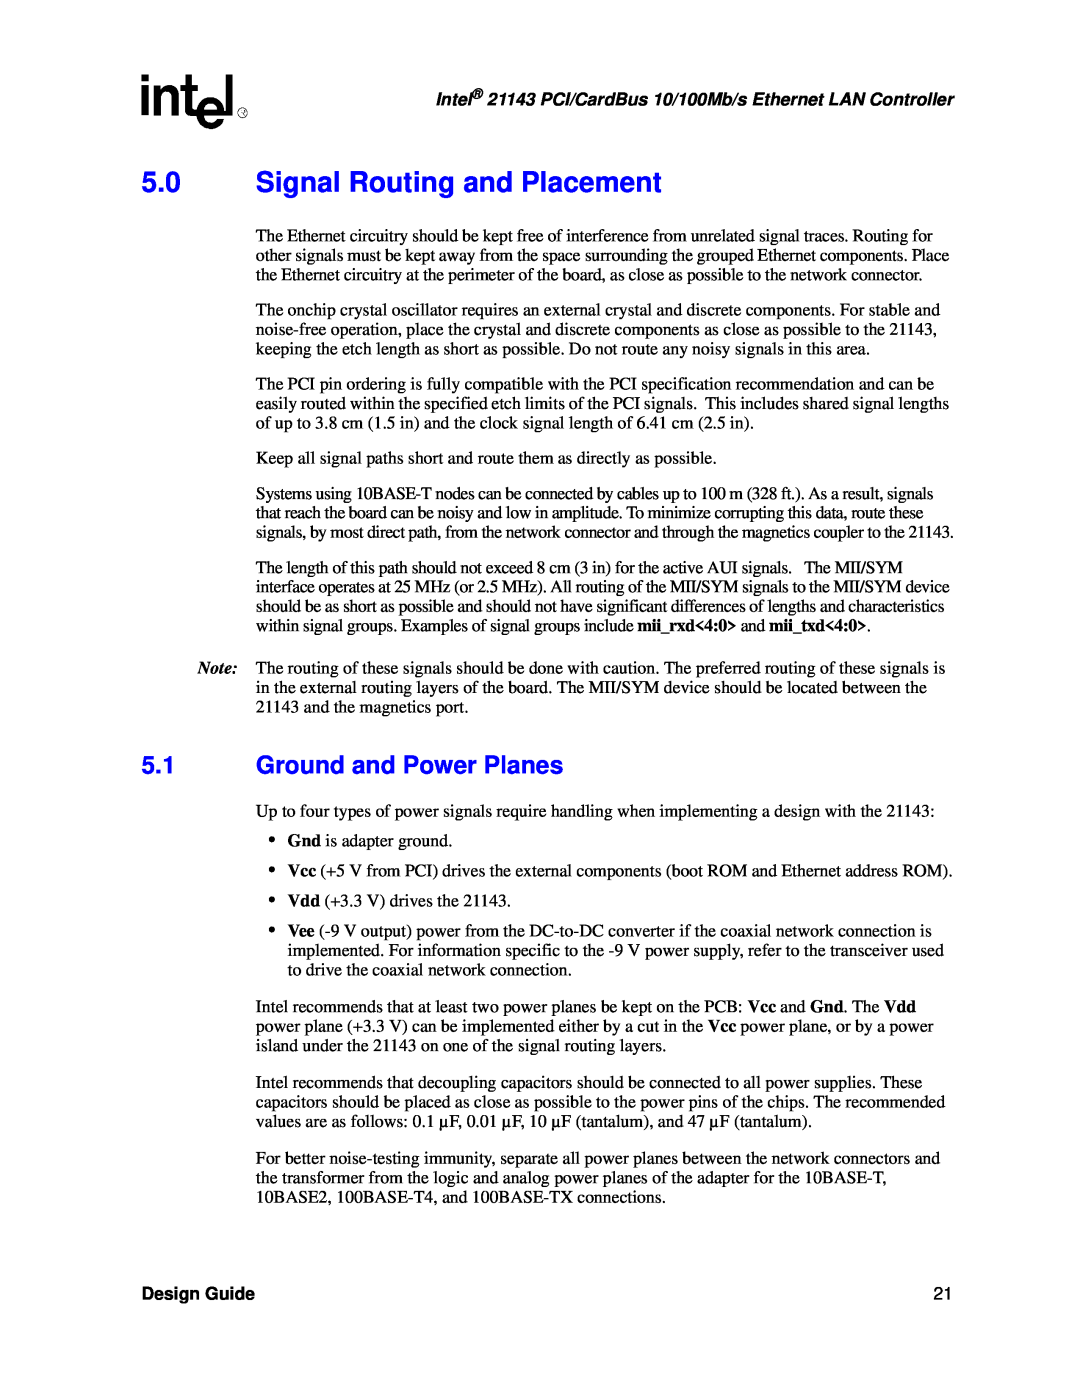 Intel 21143 manual Signal Routing and Placement, Ground and Power Planes, Design Guide 